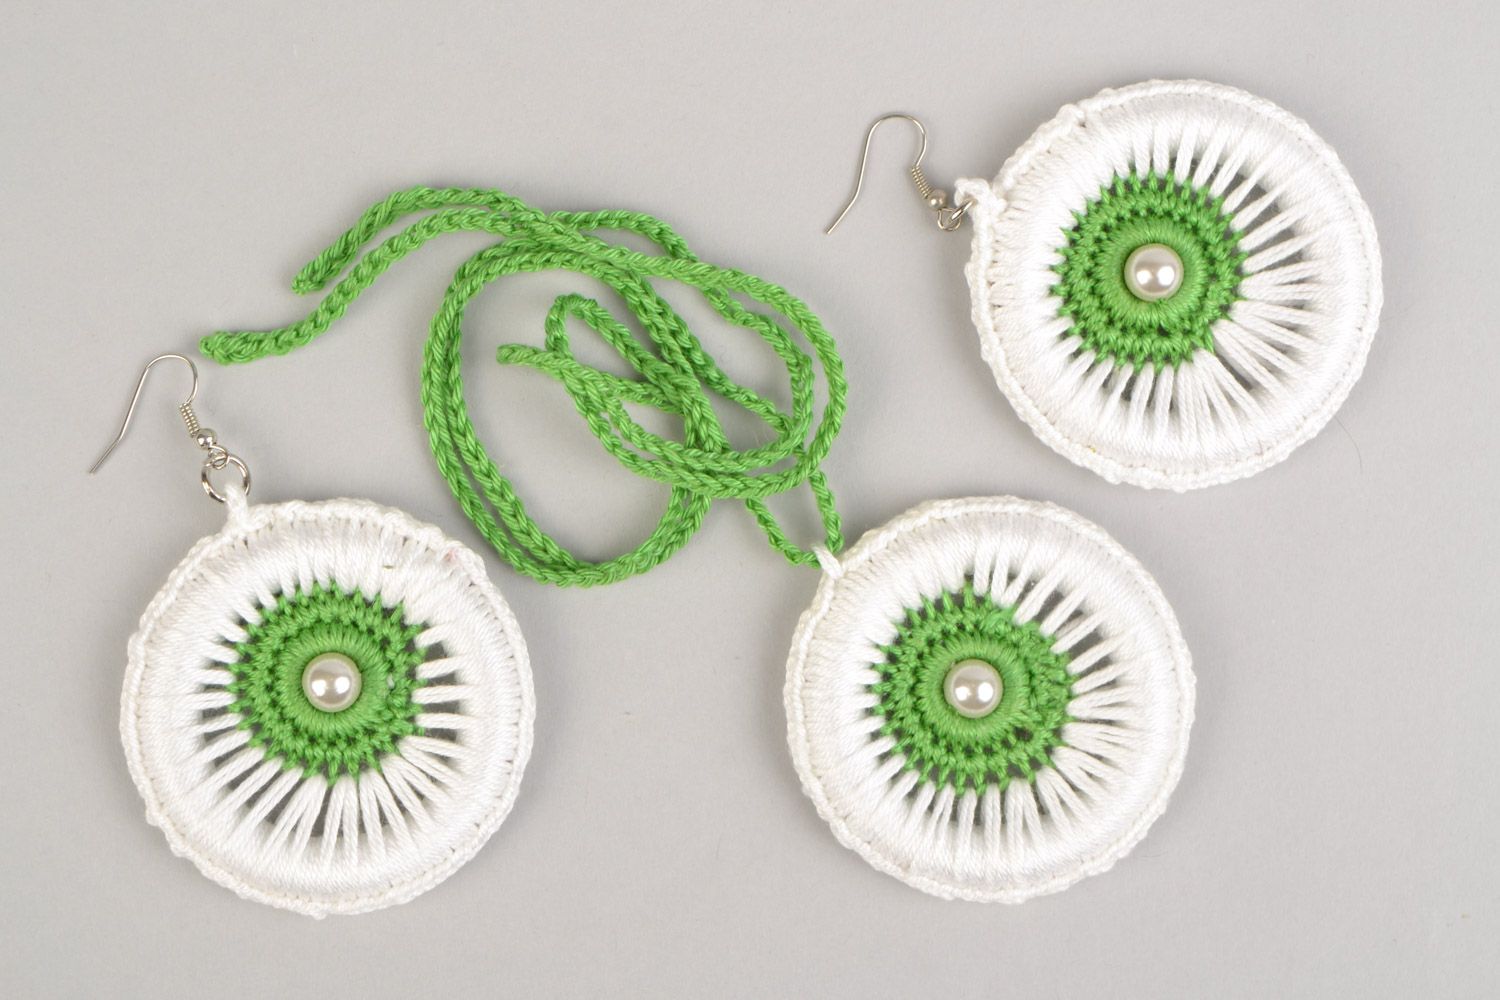 Handmade jewelry set 2 items long earrings and pendant woven of cotton threads photo 2